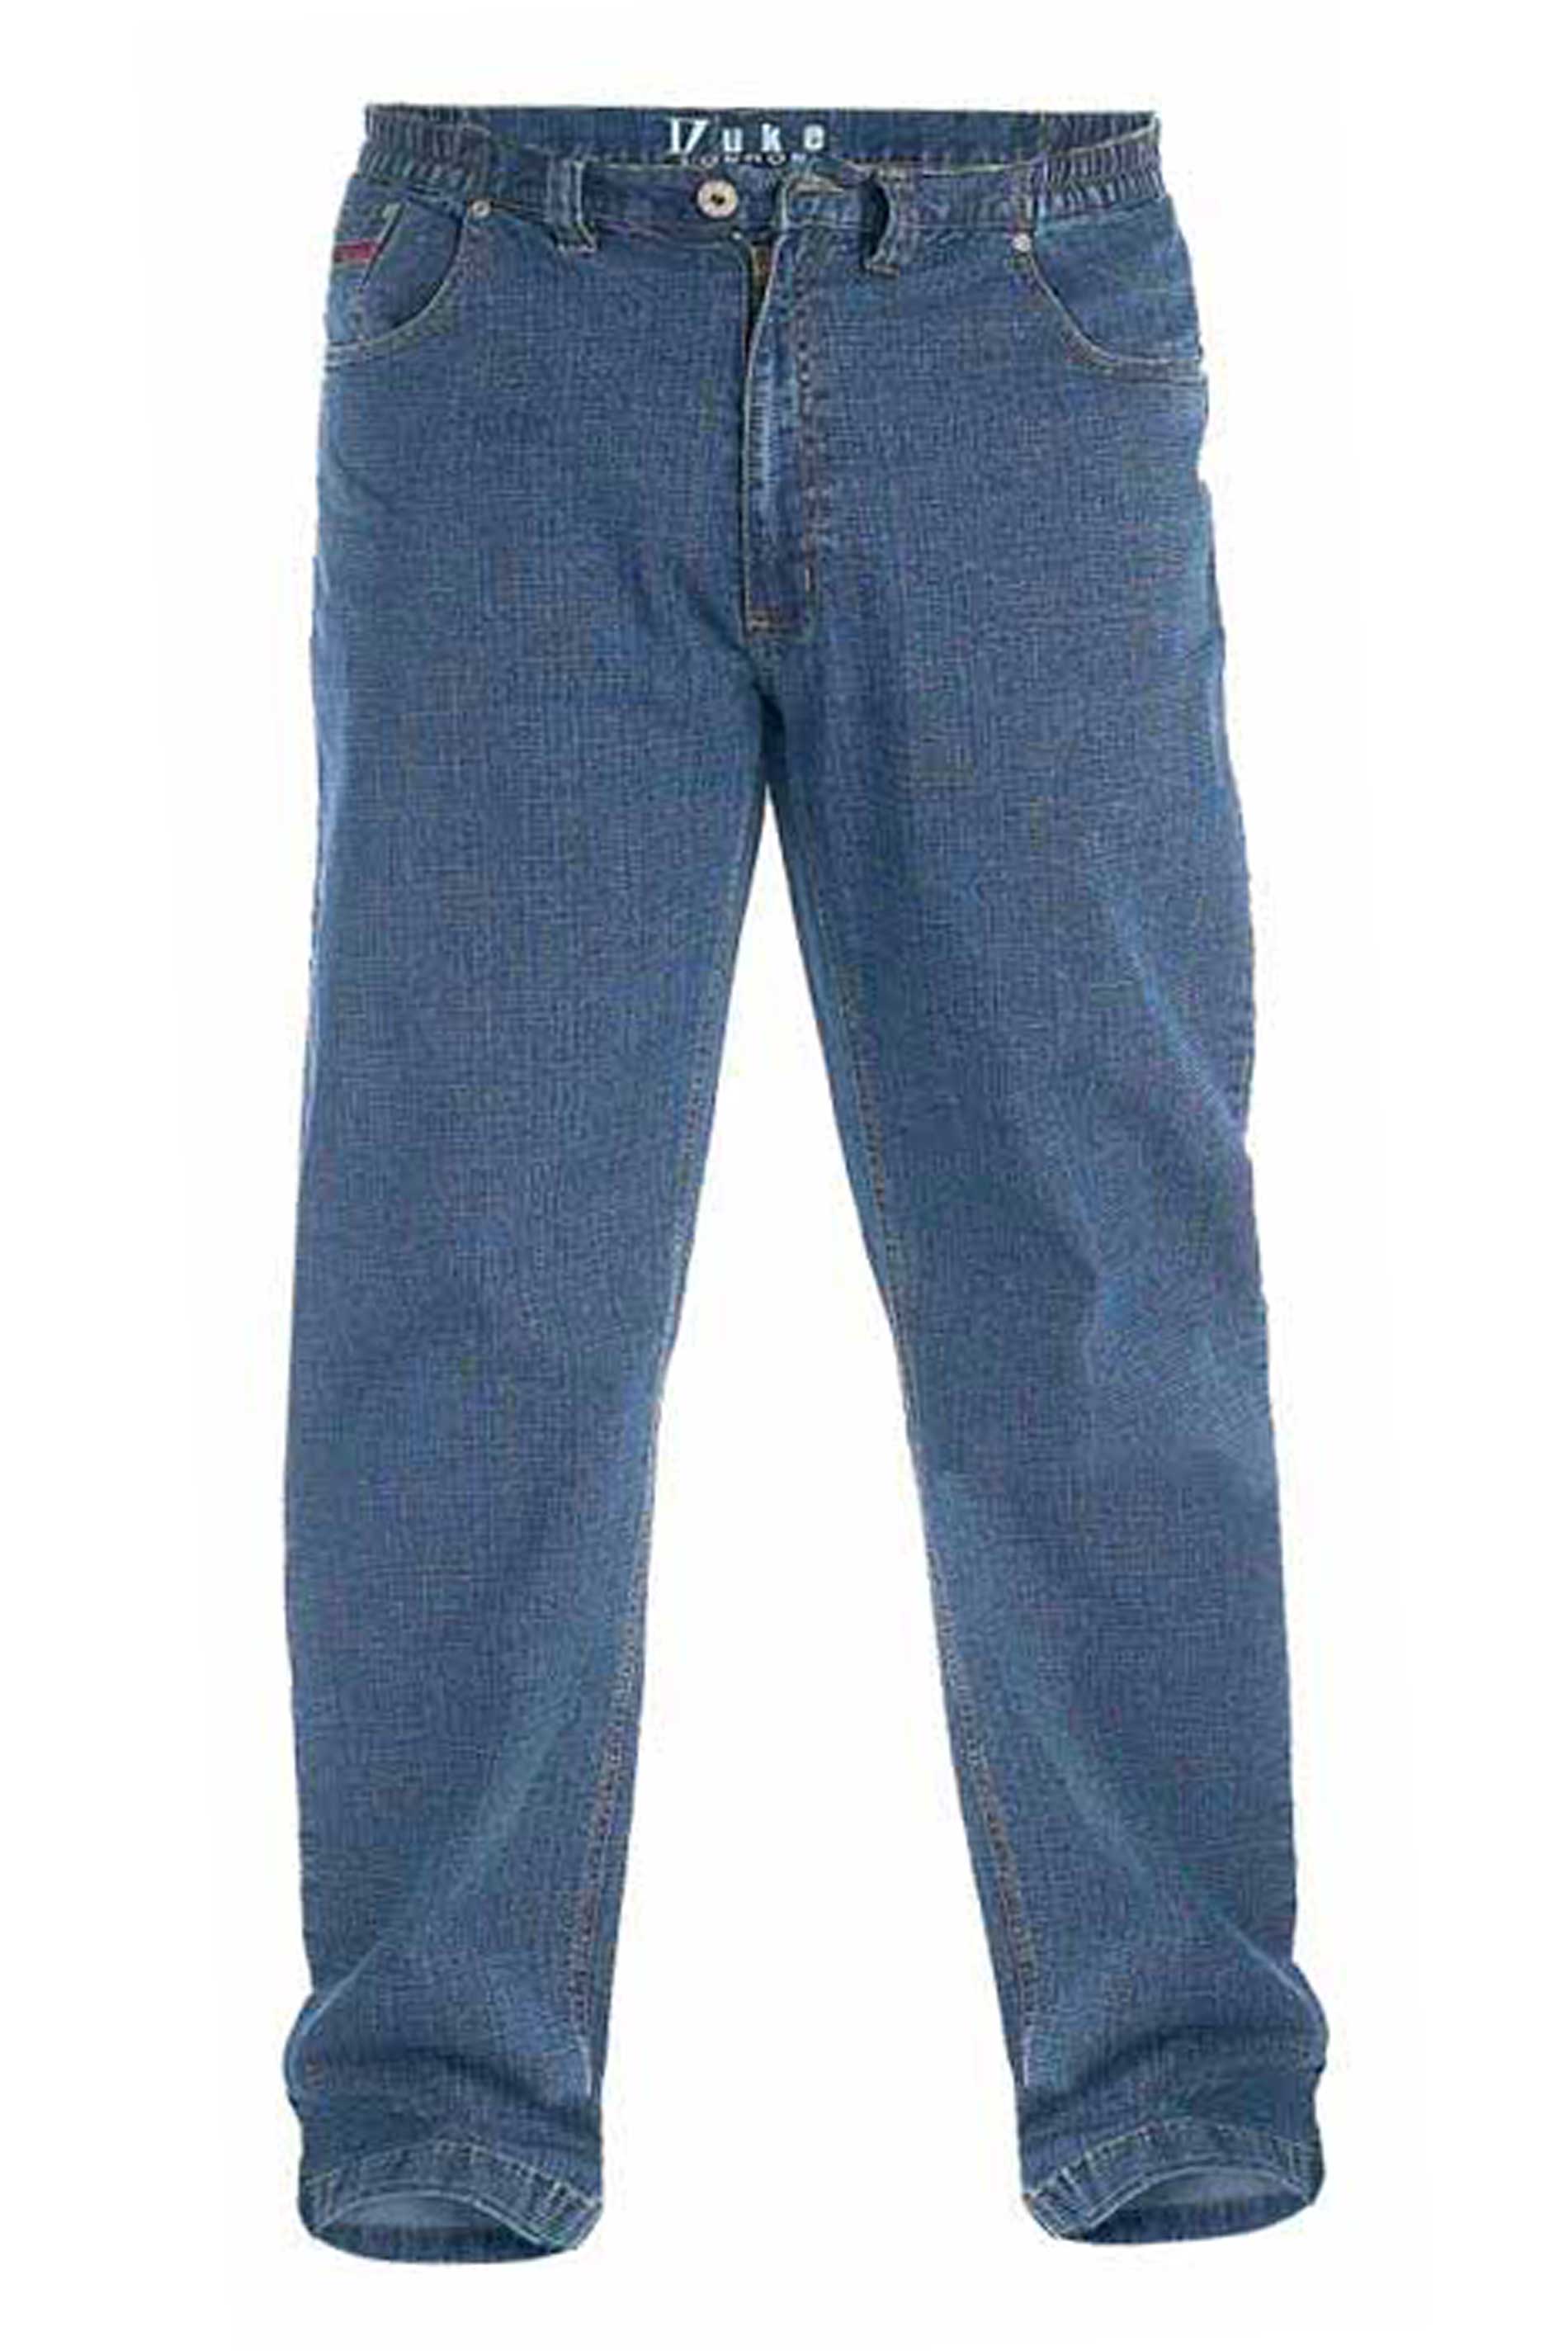 D555 Blue Elasticated Waist Relaxed Fit Jeans | BadRhino 3